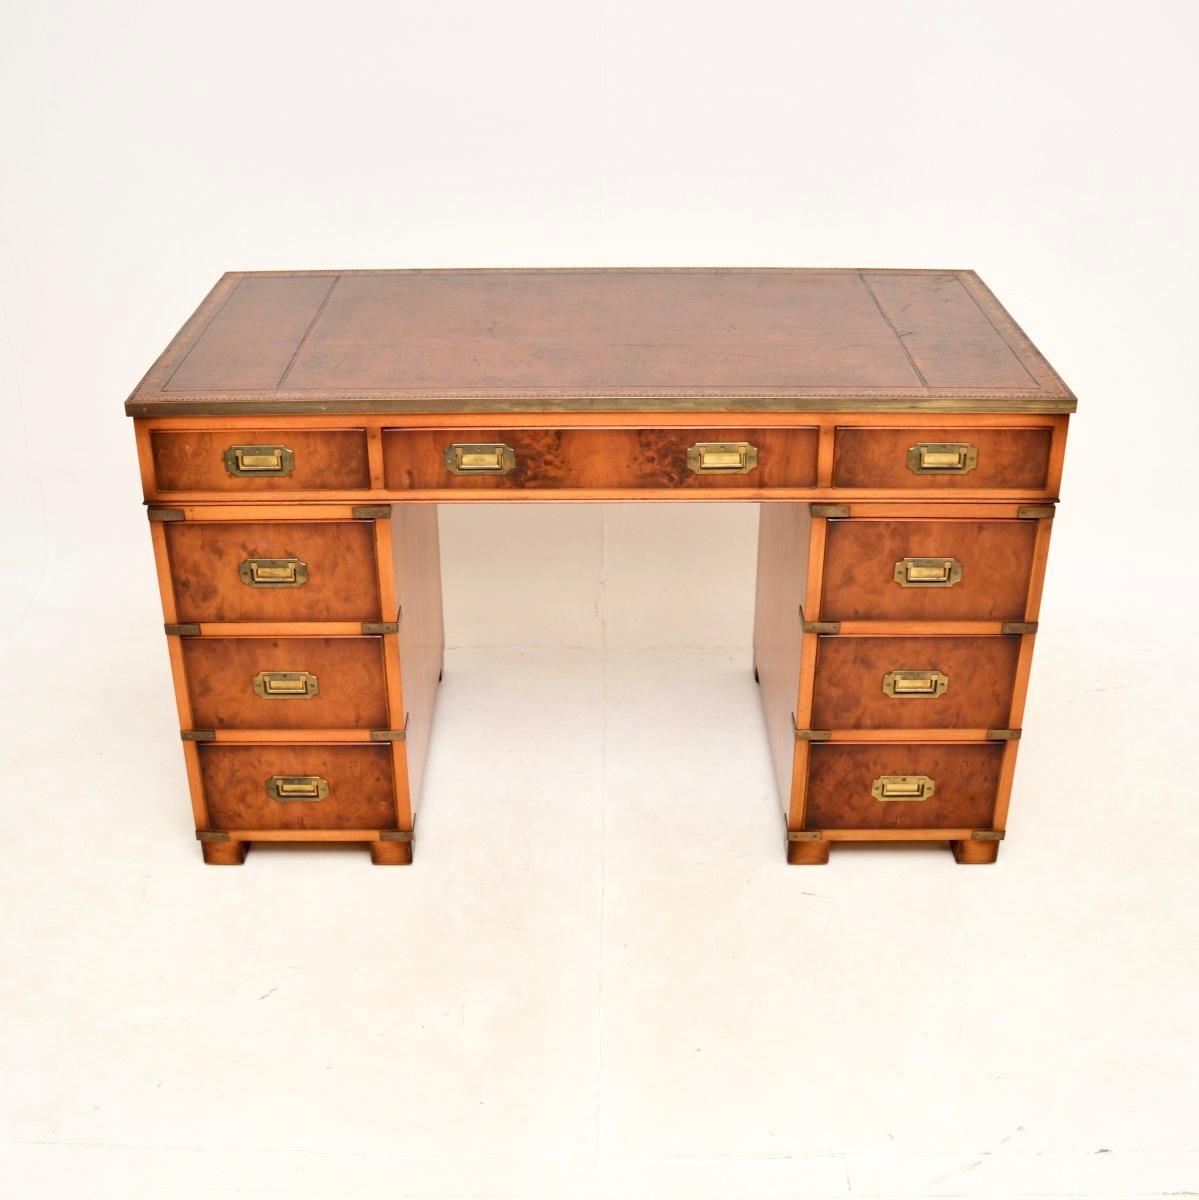 A top quality antique yew wood military campaign style pedestal desk. This was made in England, it dates from around the 1950’s.

It is very well made, with a useful and smart design. The yew wood has a lovely colour tone, there is high quality